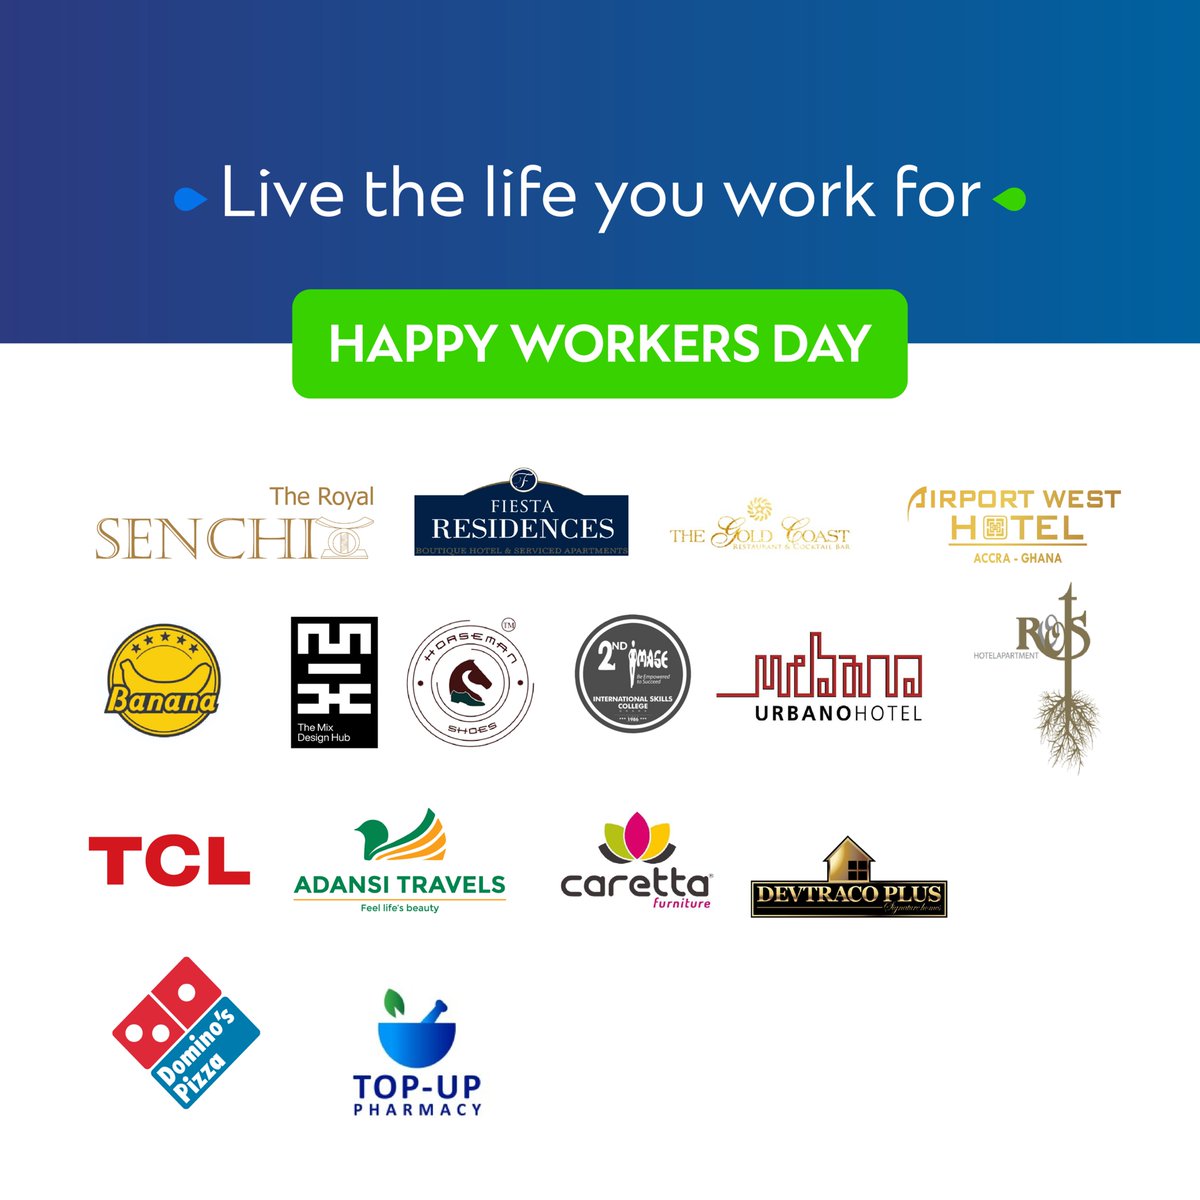 Take time out today to enjoy the very things you work hard for: your essential needs, time with family, and the good life you desire. SCB supports that with up to a 20% discount from our alliance partners. Happy Workers’ Day! #StanChartGhana #HappyWorkersDay